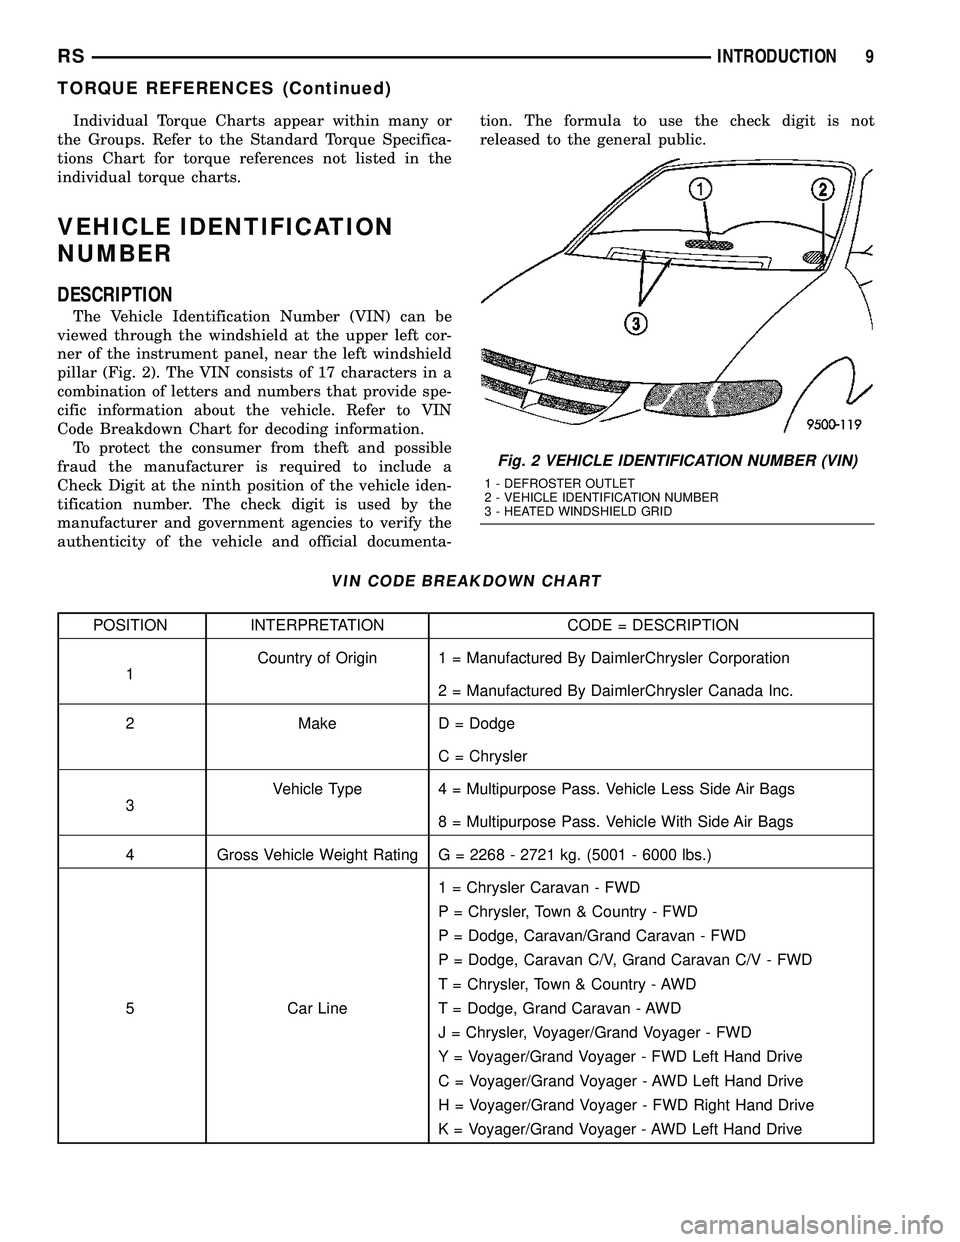 CHRYSLER VOYAGER 2005  Service Manual Individual Torque Charts appear within many or
the Groups. Refer to the Standard Torque Specifica-
tions Chart for torque references not listed in the
individual torque charts.
VEHICLE IDENTIFICATION
